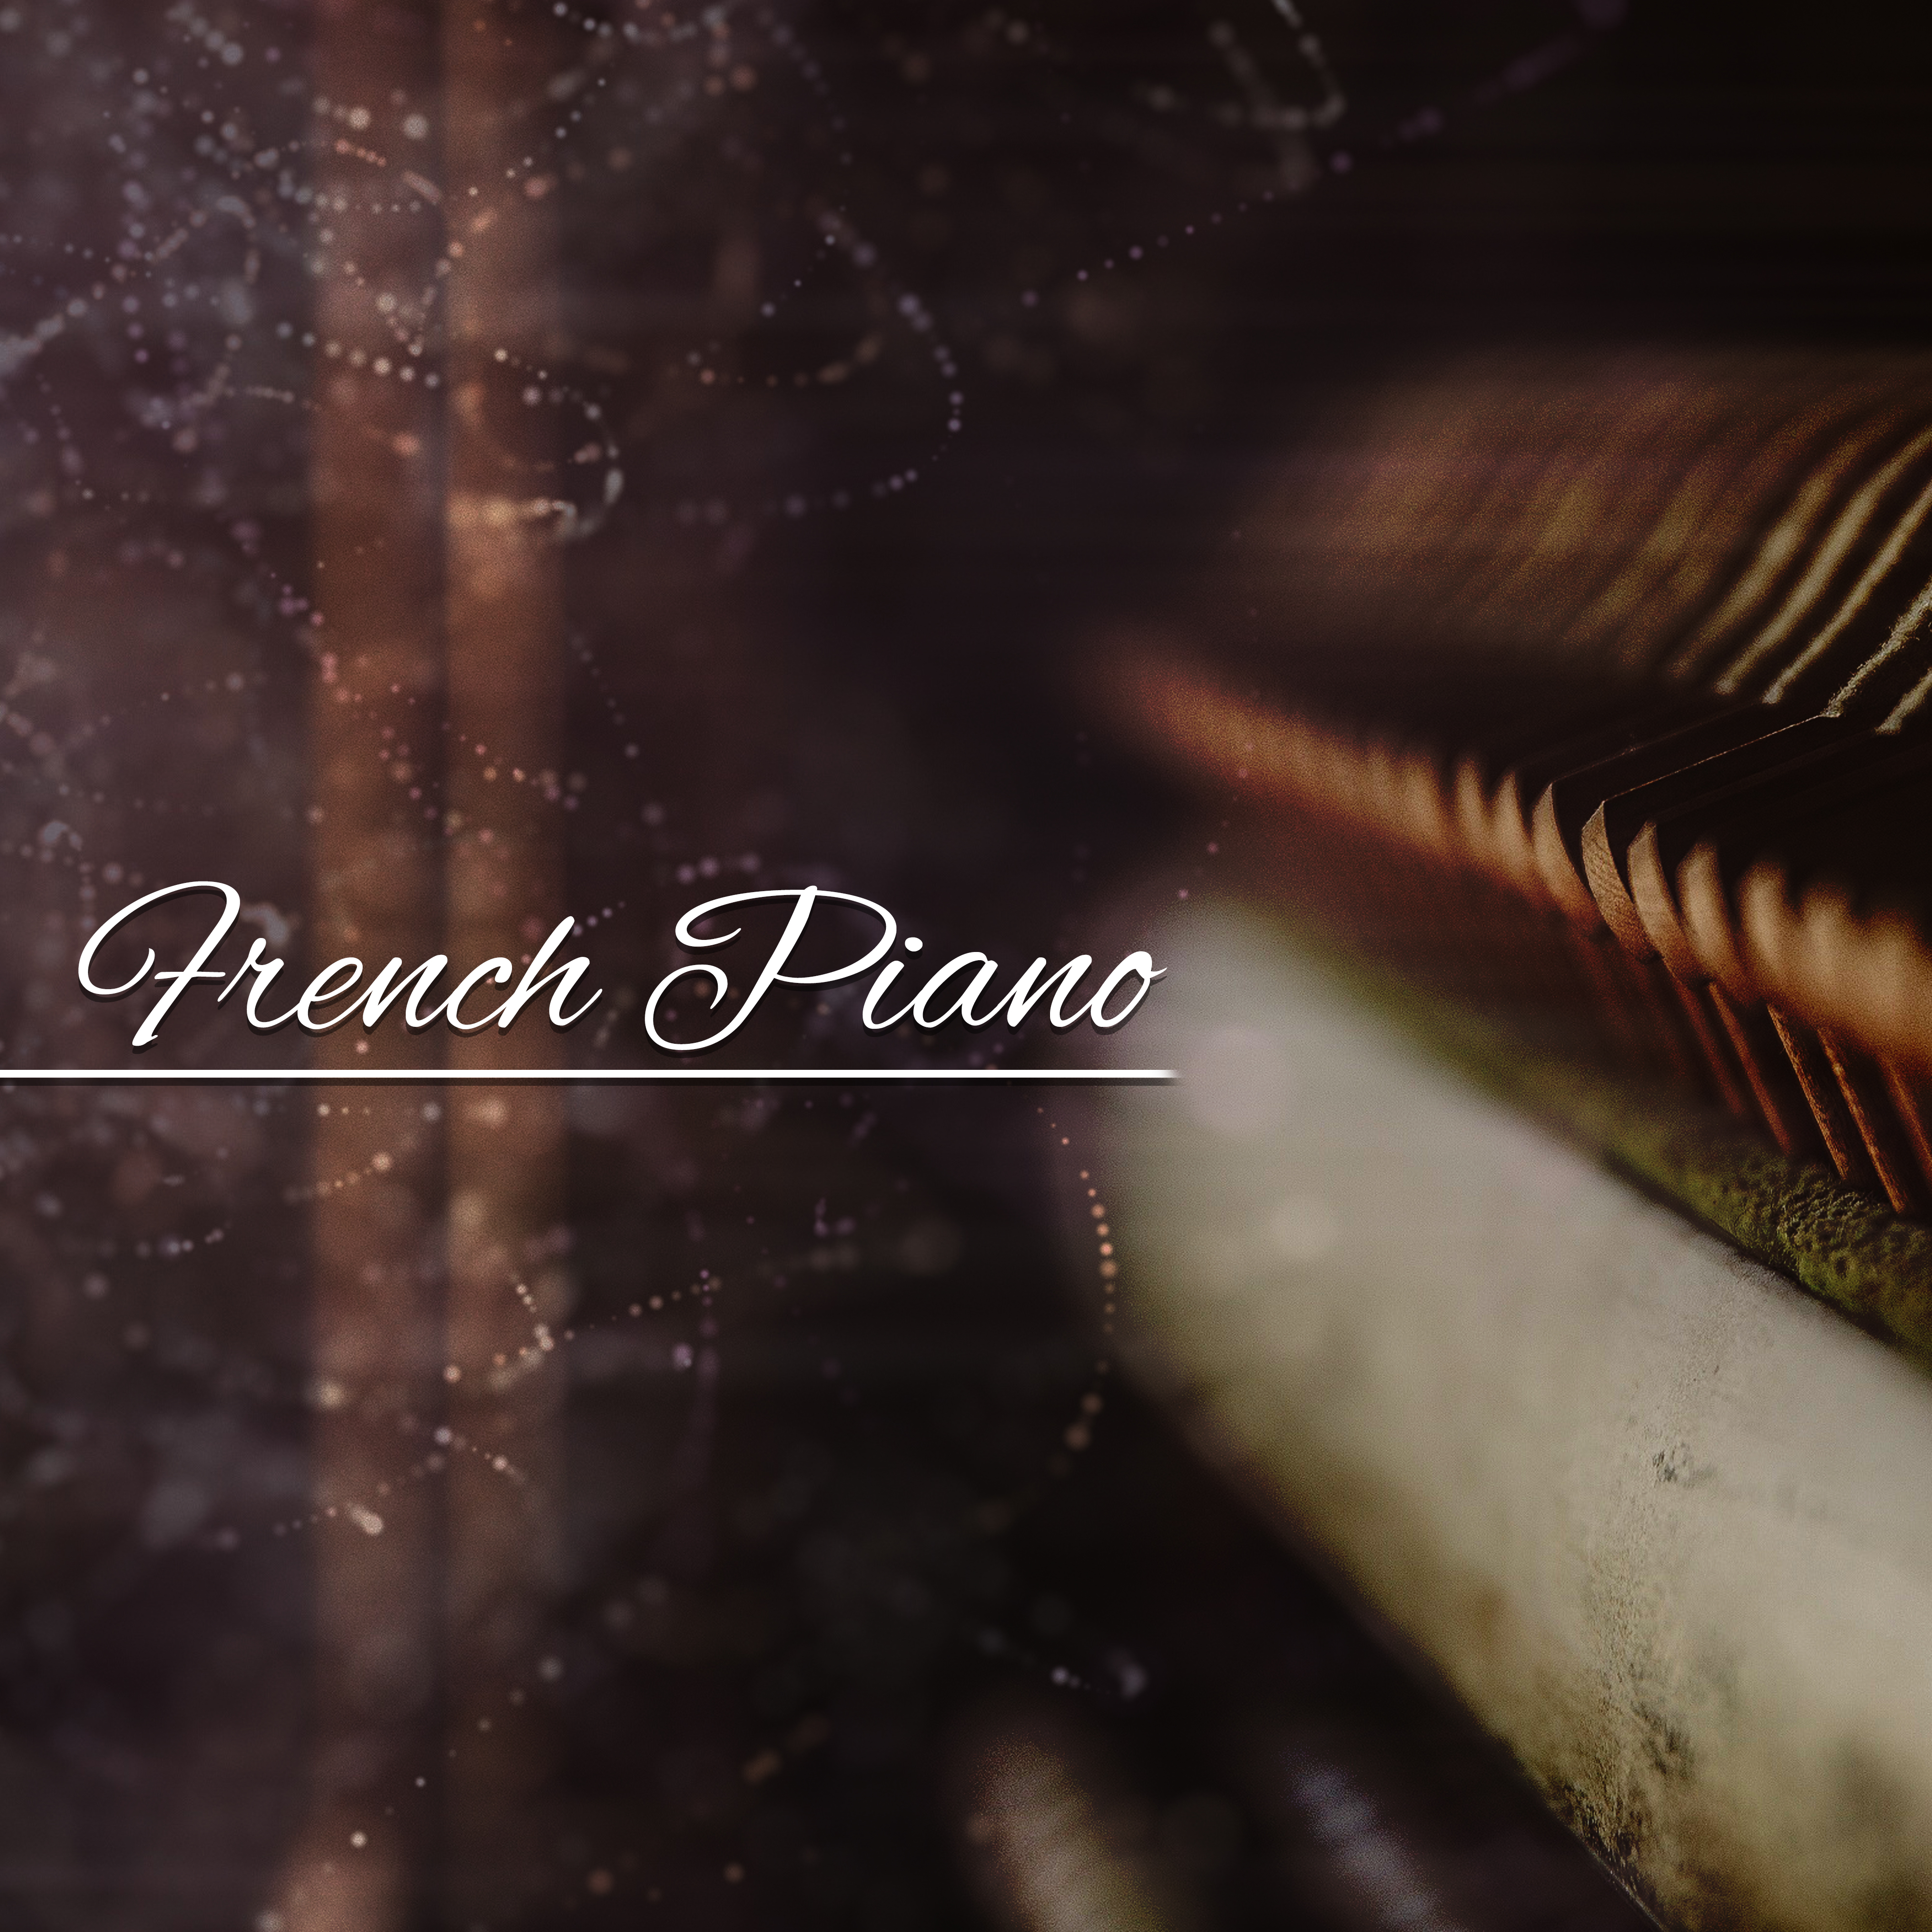 French Piano – Ambient Jazz Instrumental, Piano Music, Chilled Jazz Lounge, Relaxing Jazz